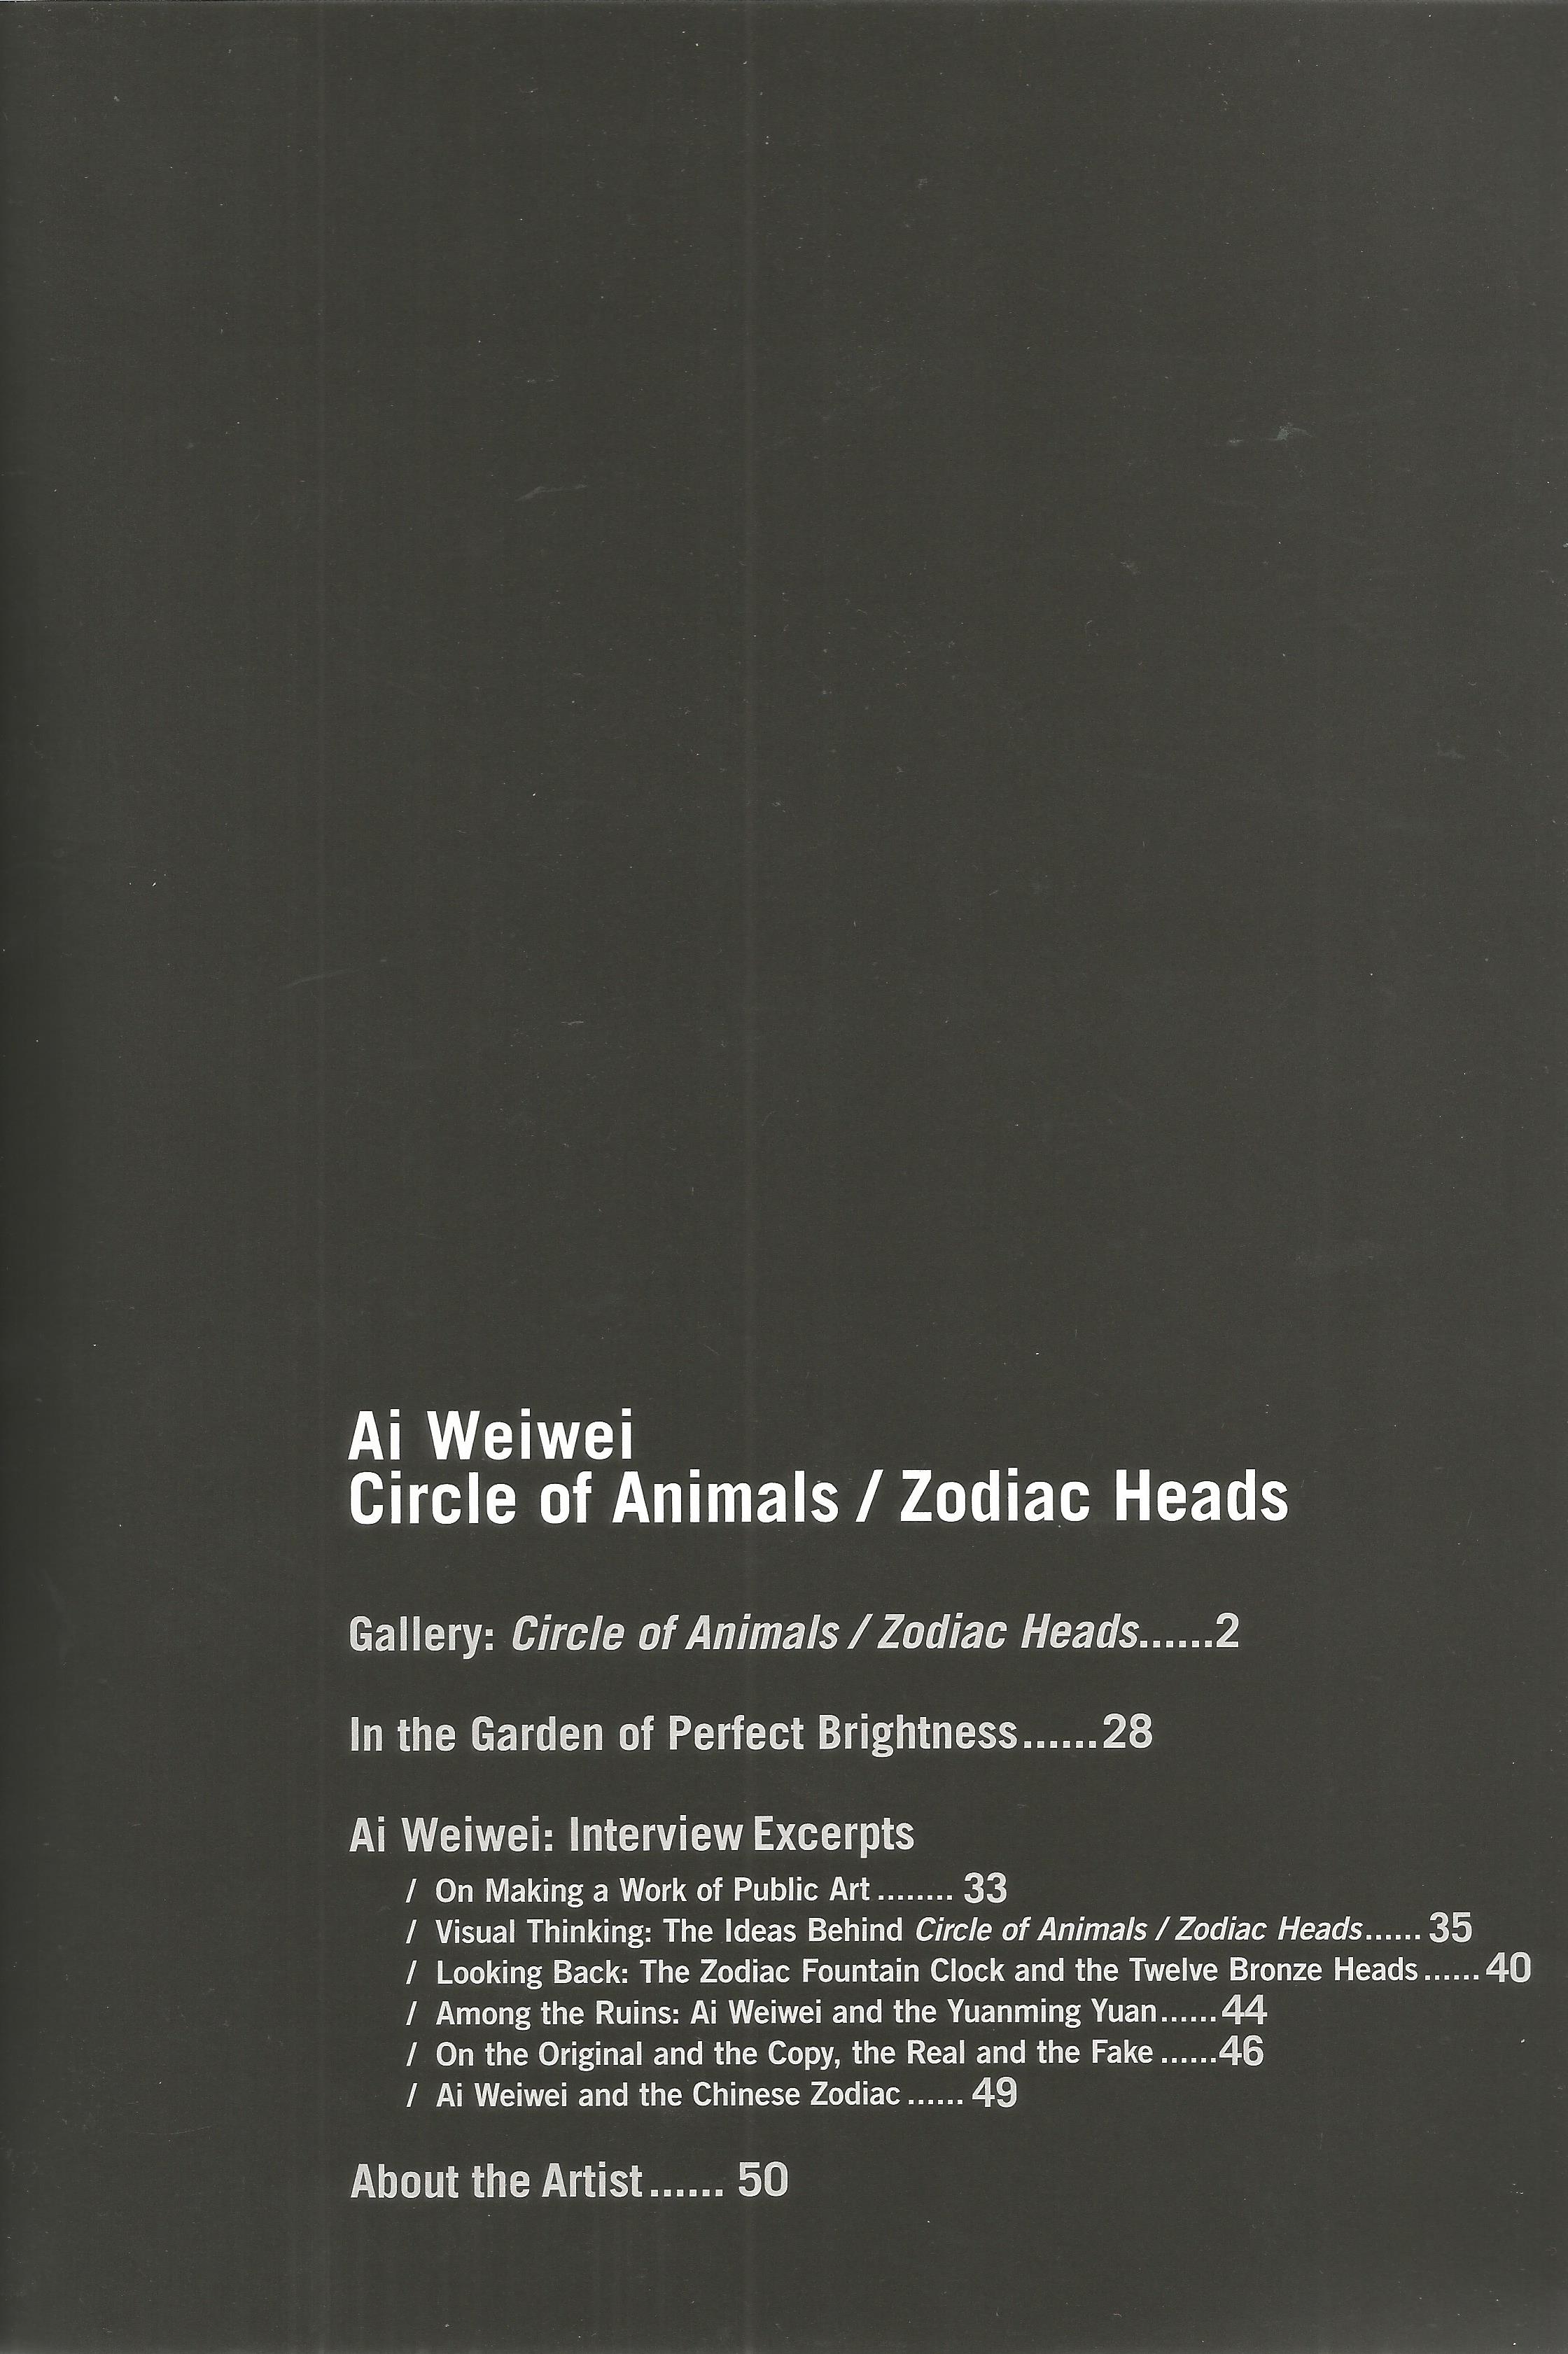 Circle of Animals Zodiac Heads by Ai Weiwei Softback Book 2011 published by A W Asia good - Image 2 of 3